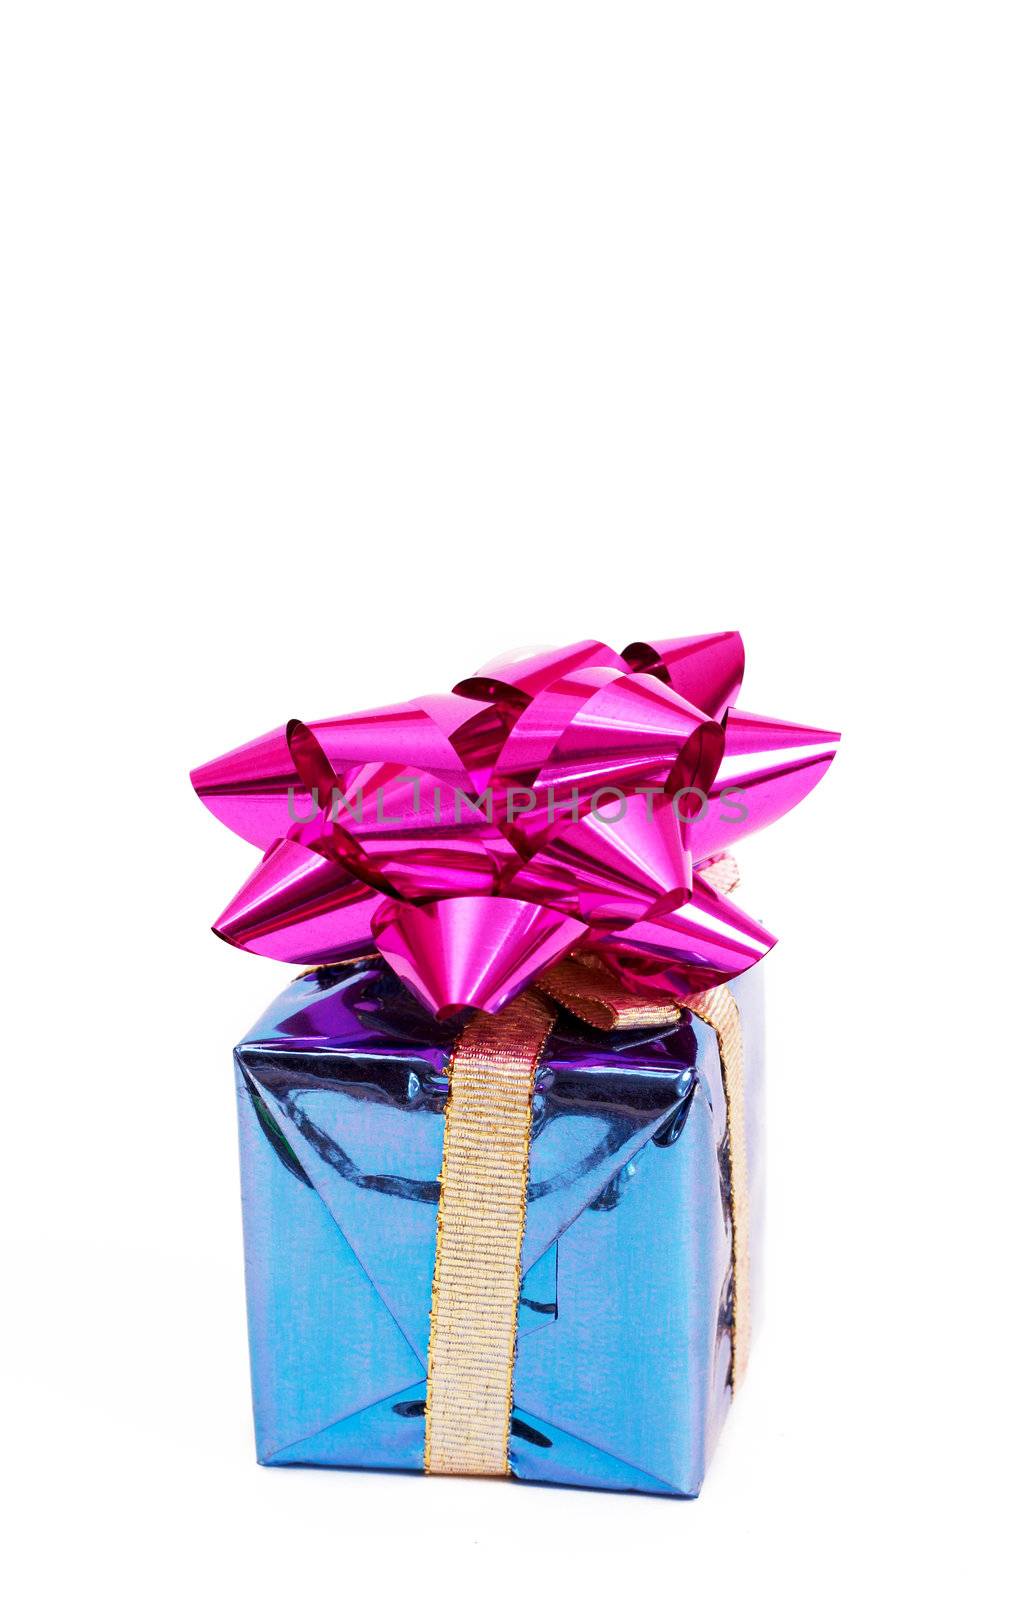 Purple gift box with a bow by Elenat